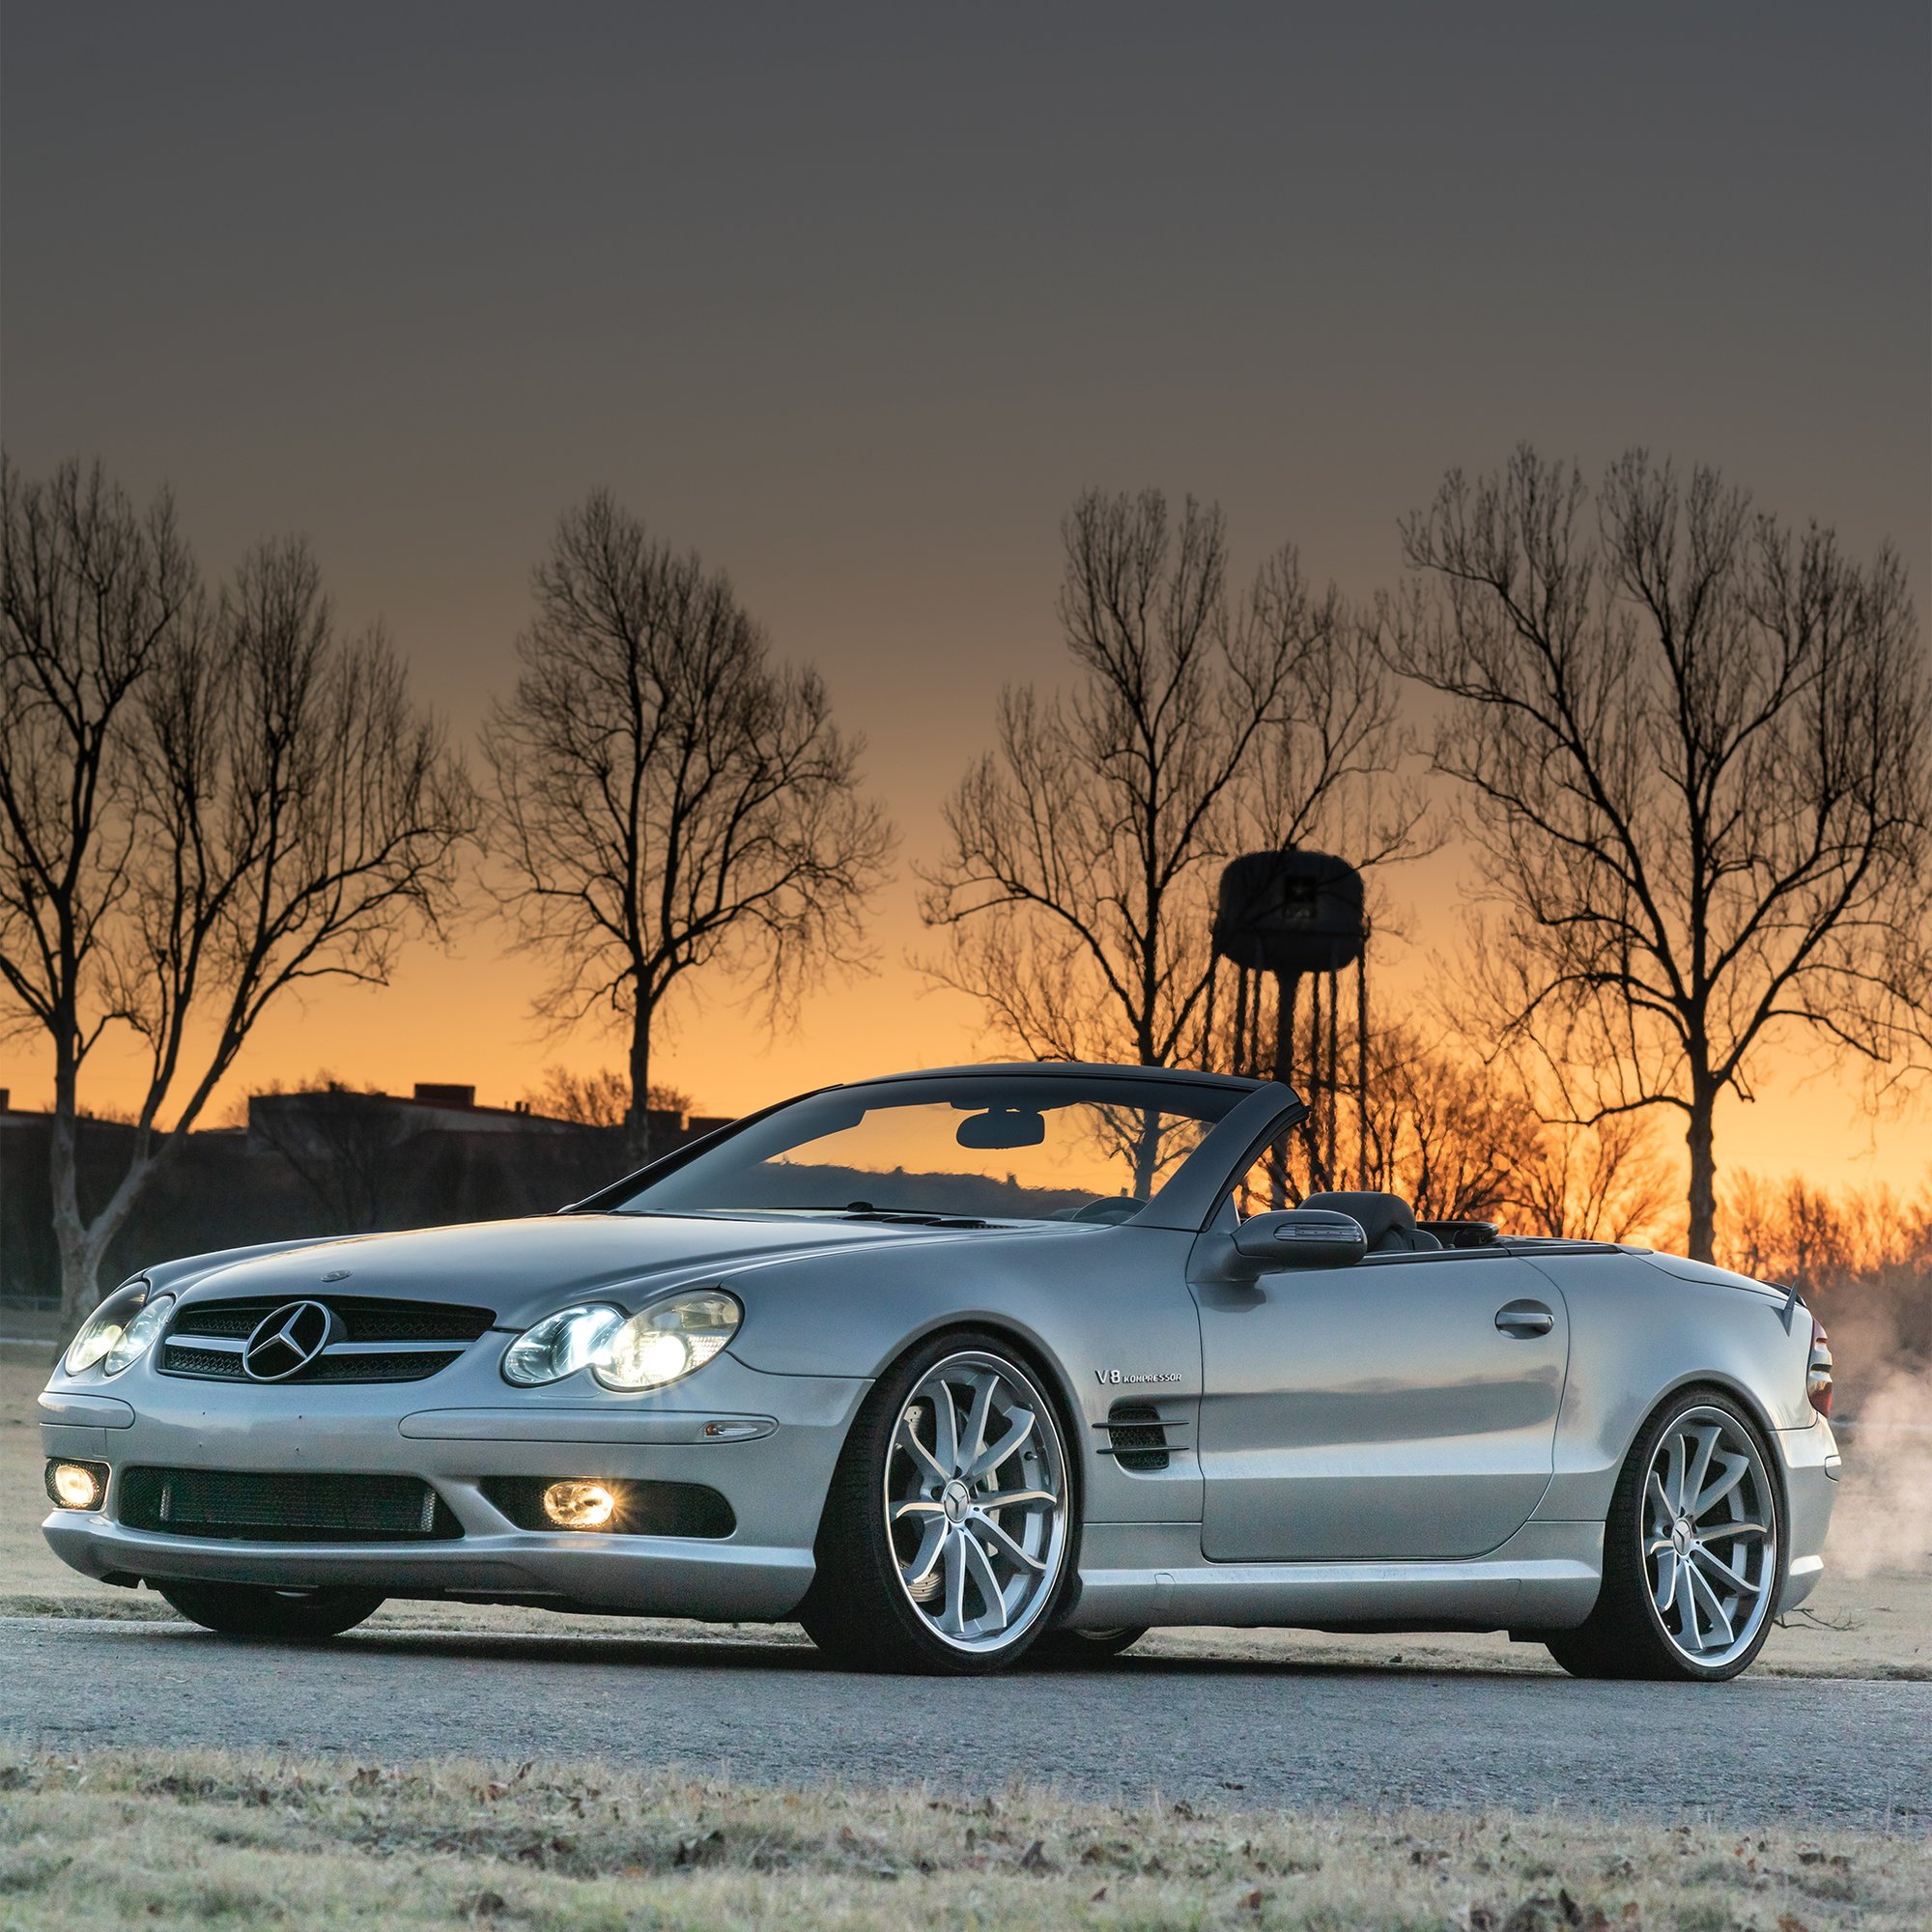 2004 Mercedes-Benz SL55 AMG - GORGEOUS 600 HP SL55 Hard Top Convertible - Used - VIN WDBSK74F04F077155 - 98,000 Miles - 8 cyl - 2WD - Automatic - Convertible - Silver - St. Simons Island, GA 32522, United States